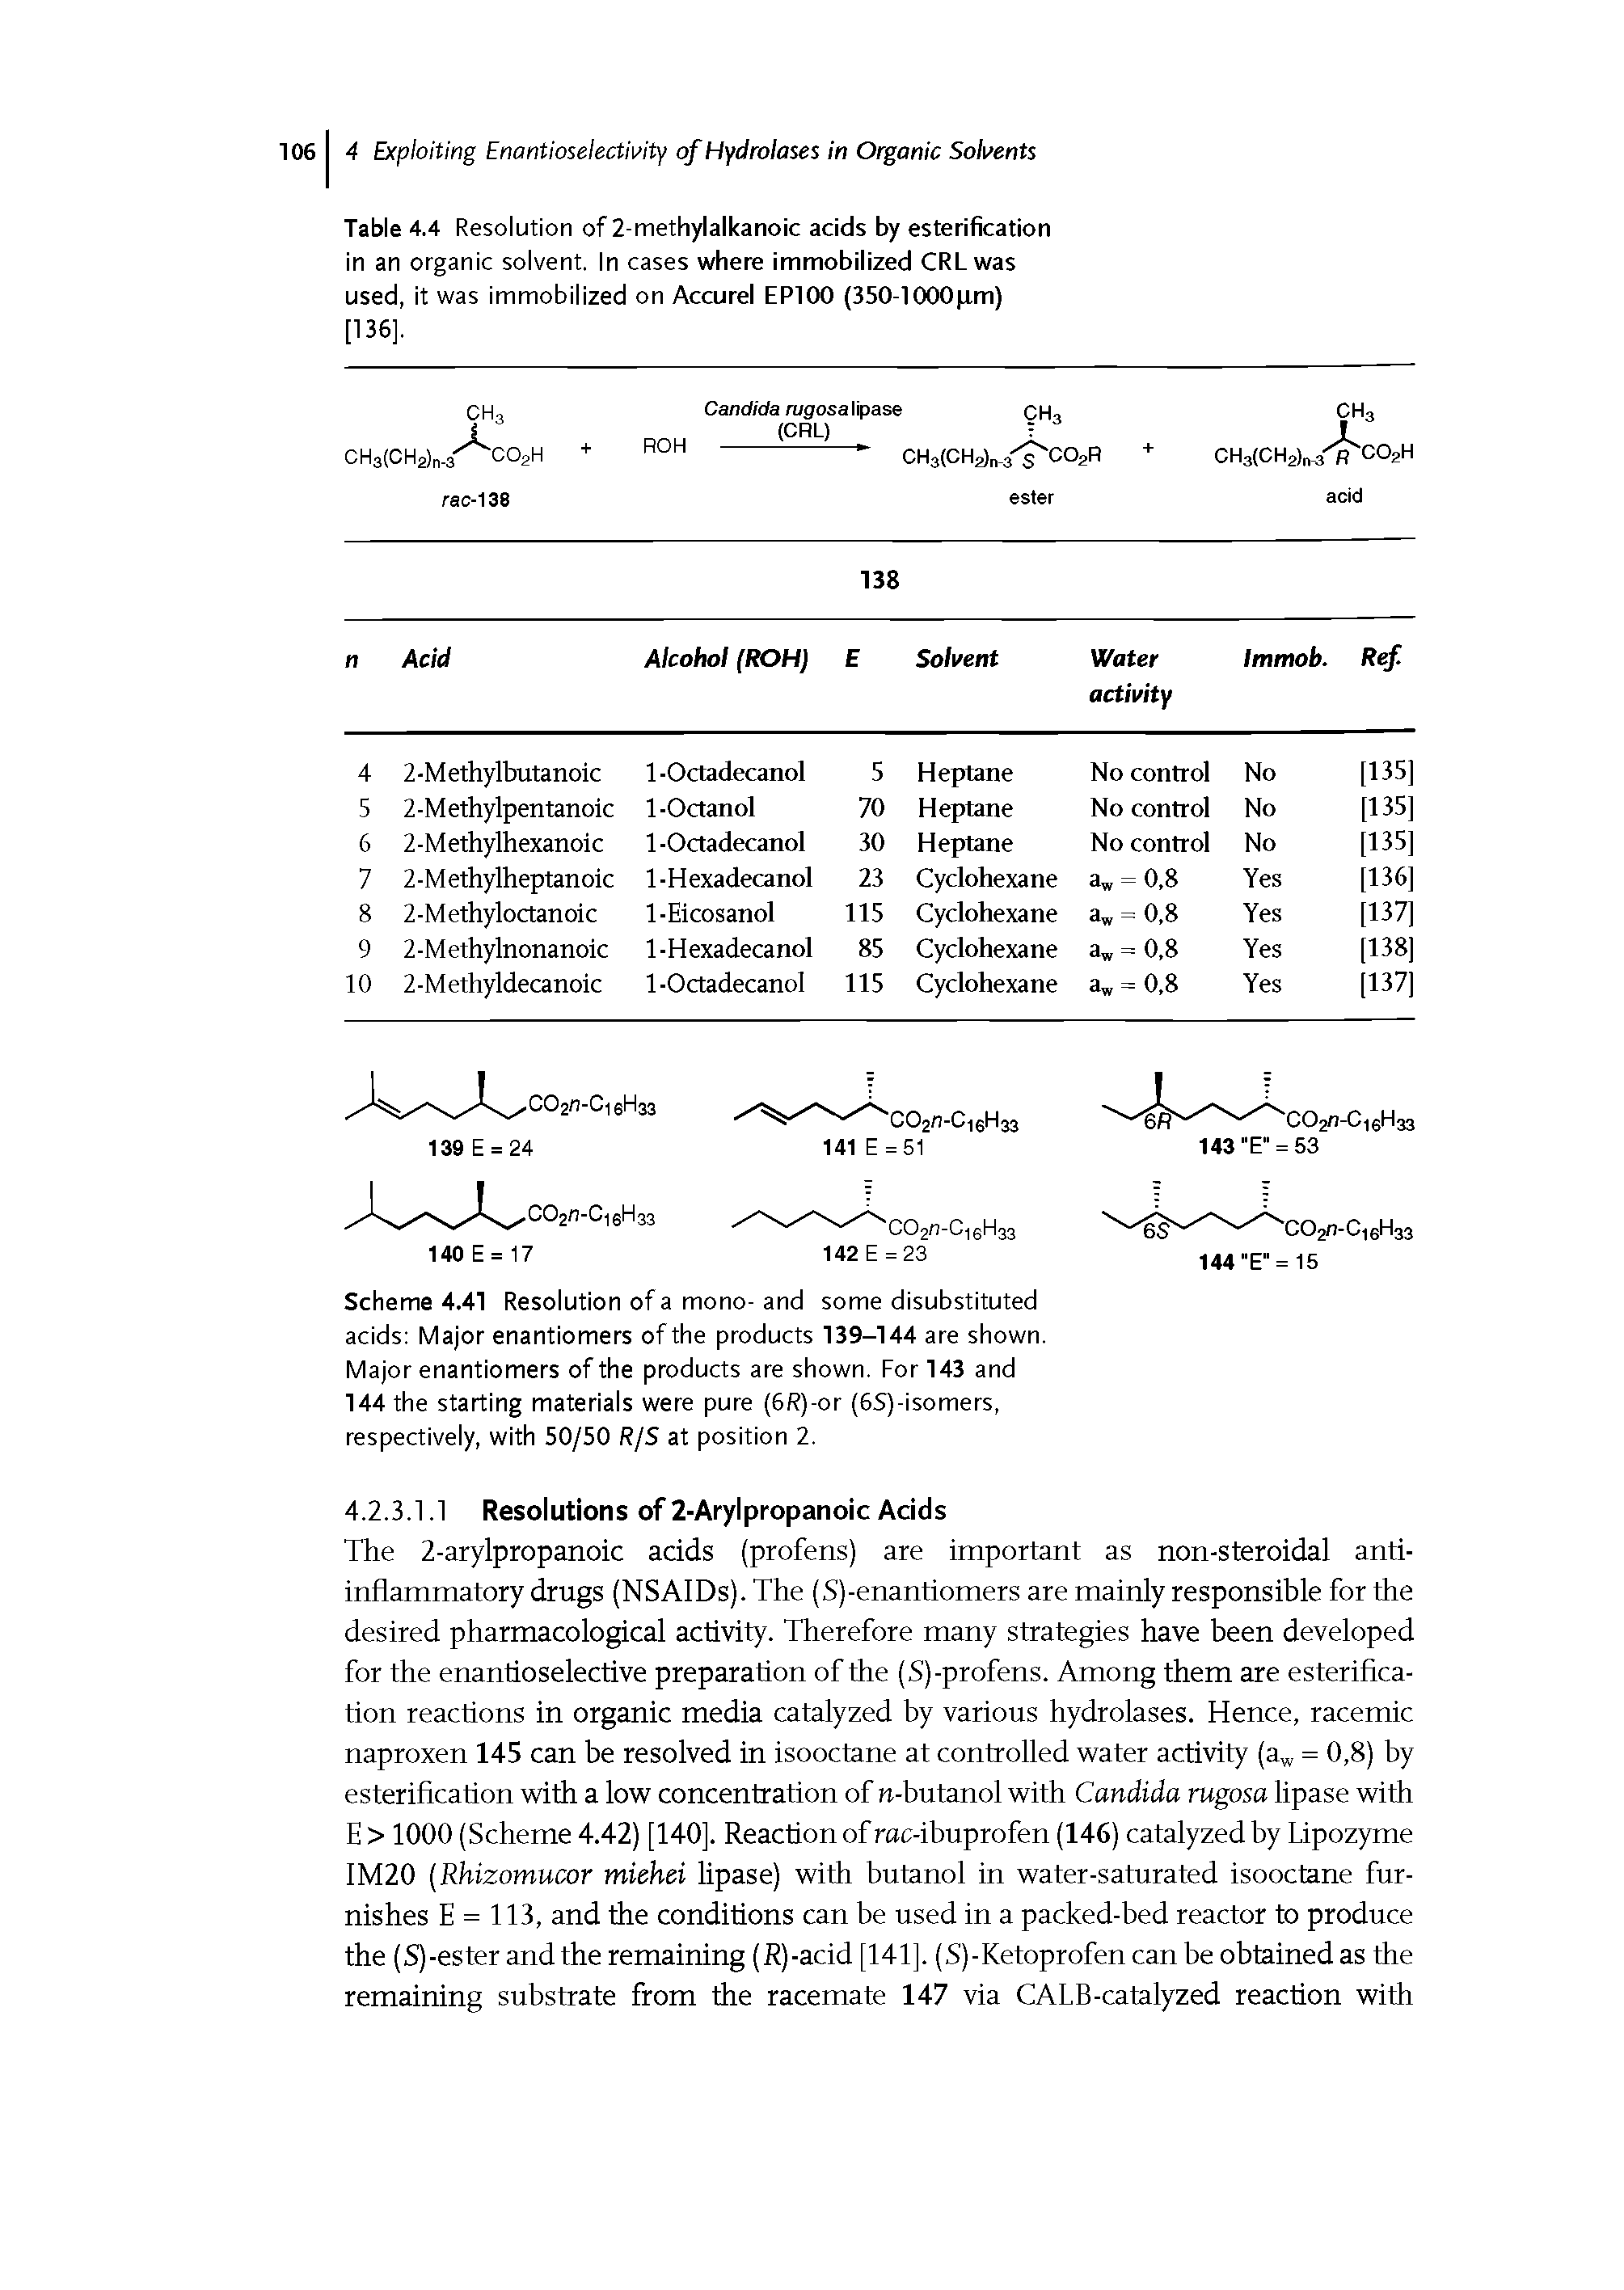 Table 4.4 Resolution of 2-methylalkanoic acids by esterification in an organic solvent. In cases where immobilized CRL was used, it was immobilized on Accurel EP100 (350-1000 ) [136].